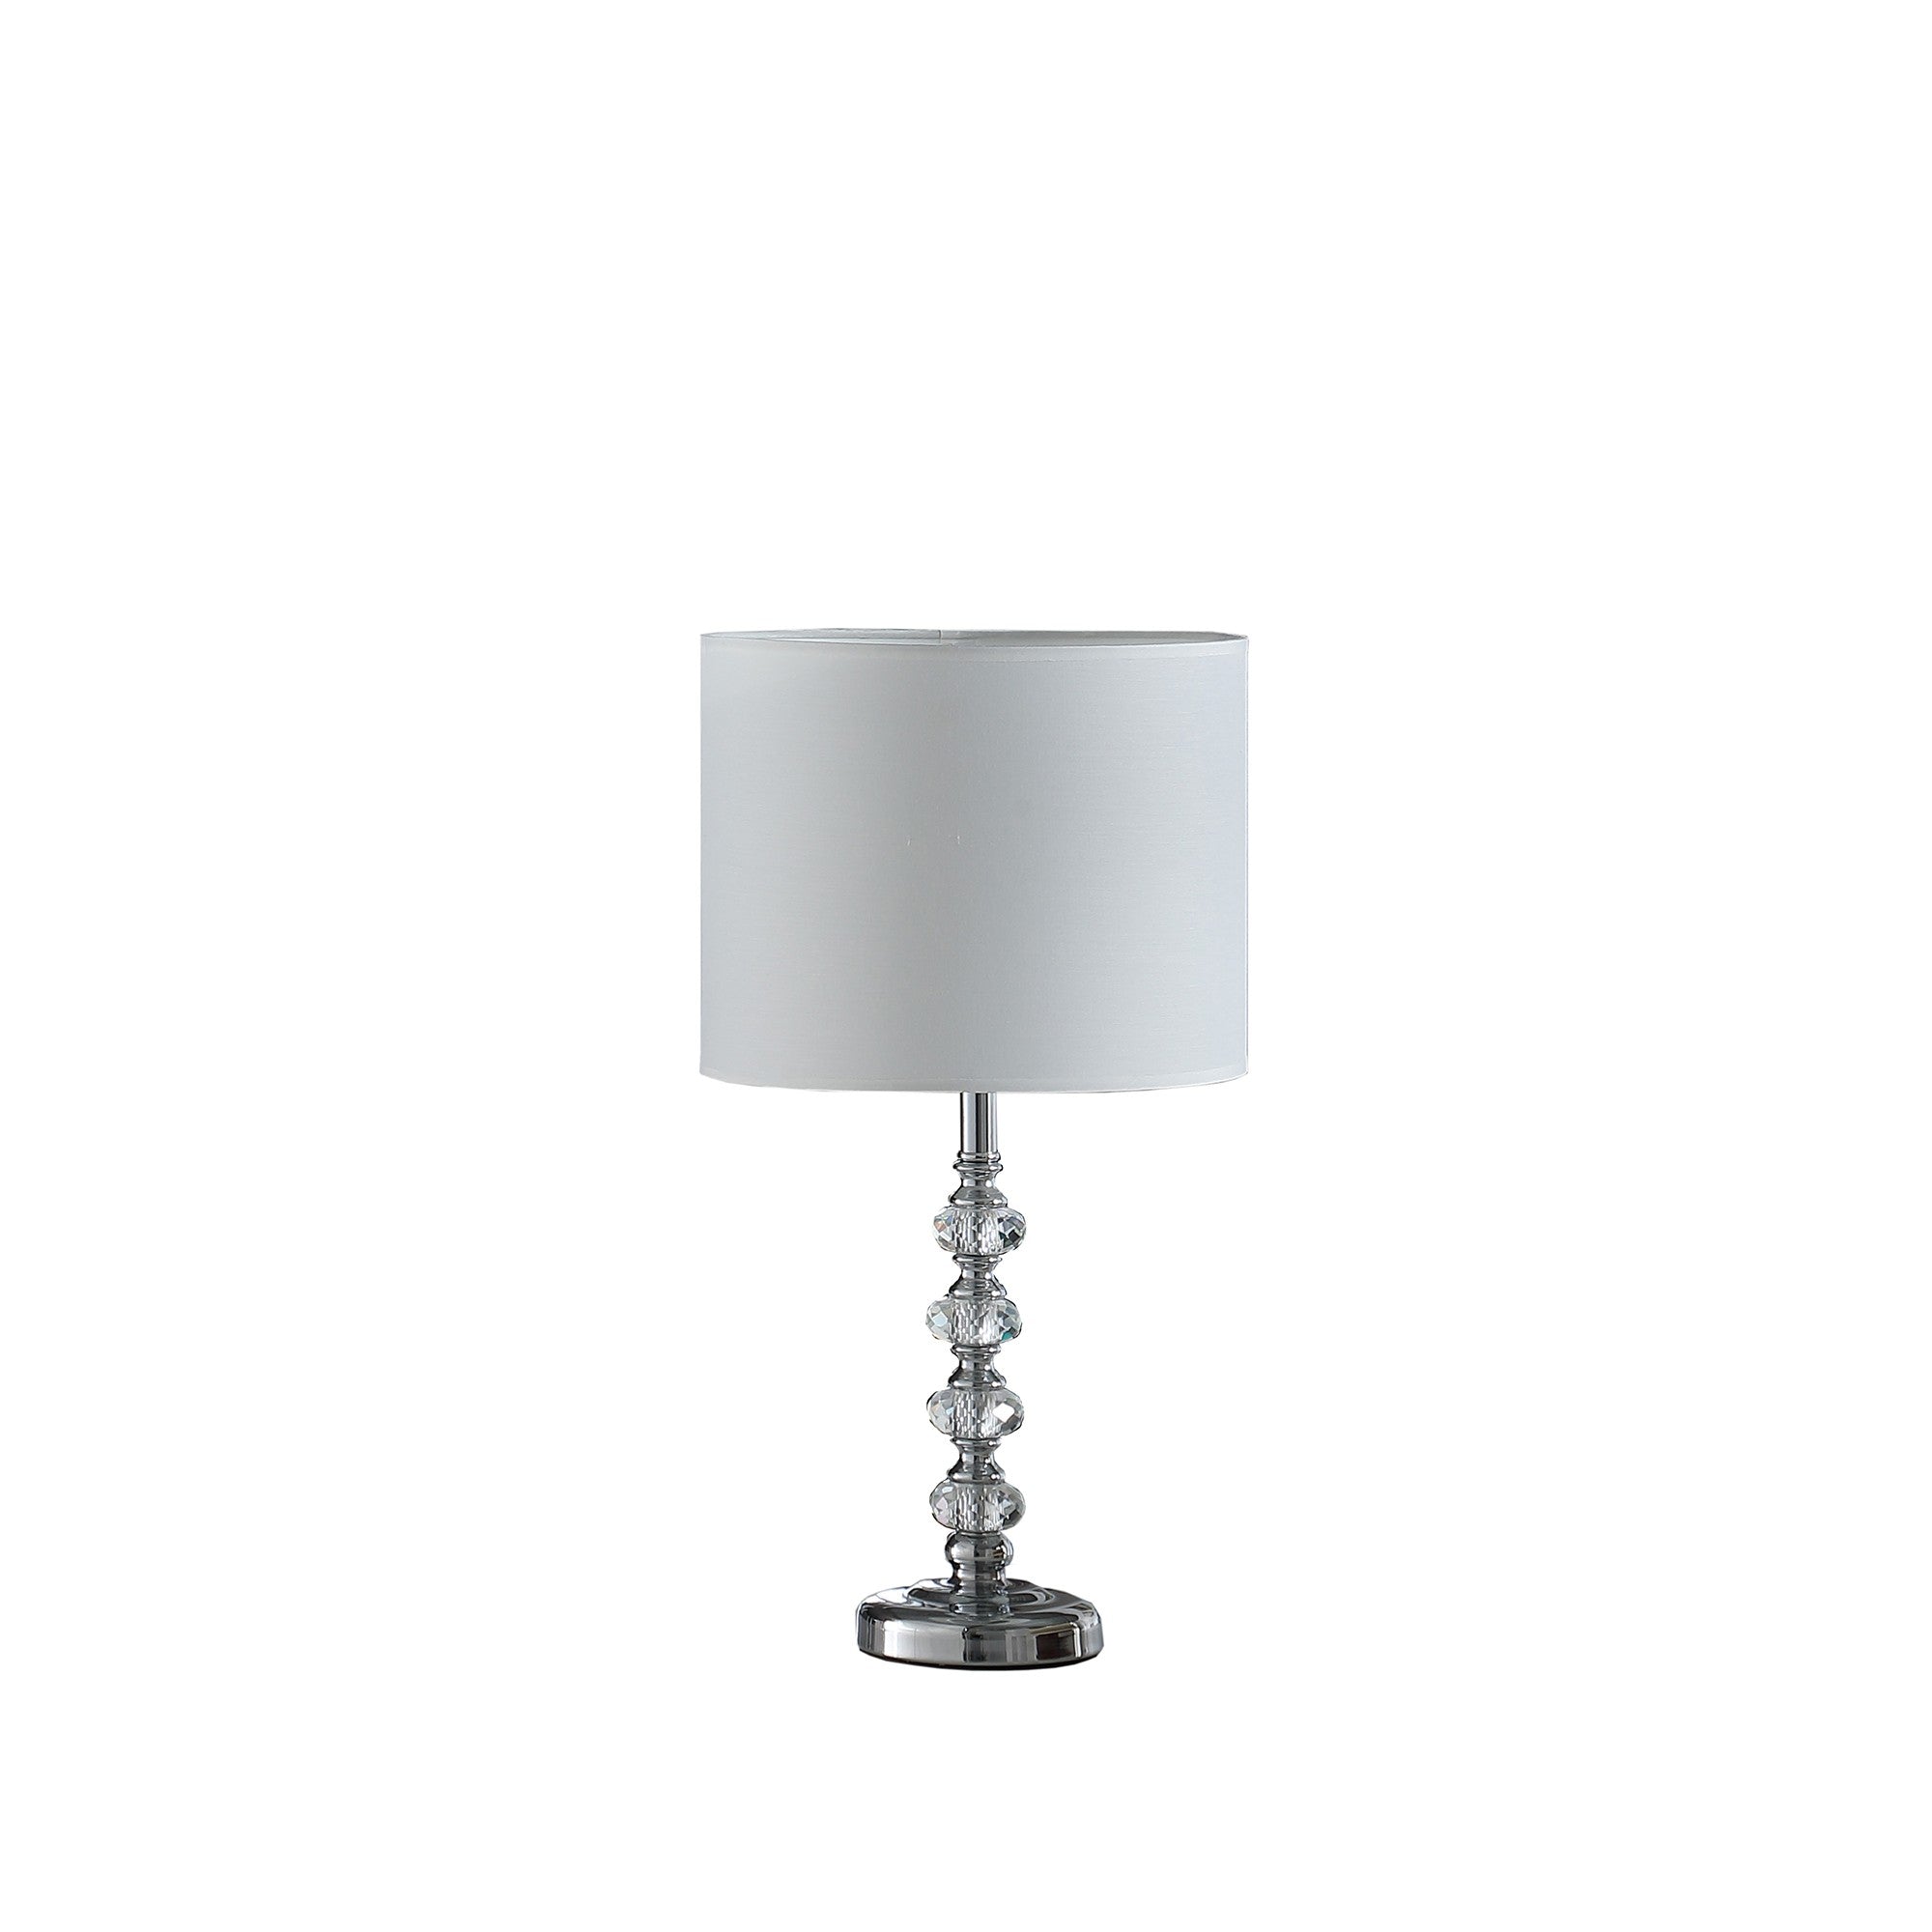 18" Silver Metal Table Lamp With White Globe Shade - Tuesday Morning-Table Lamps